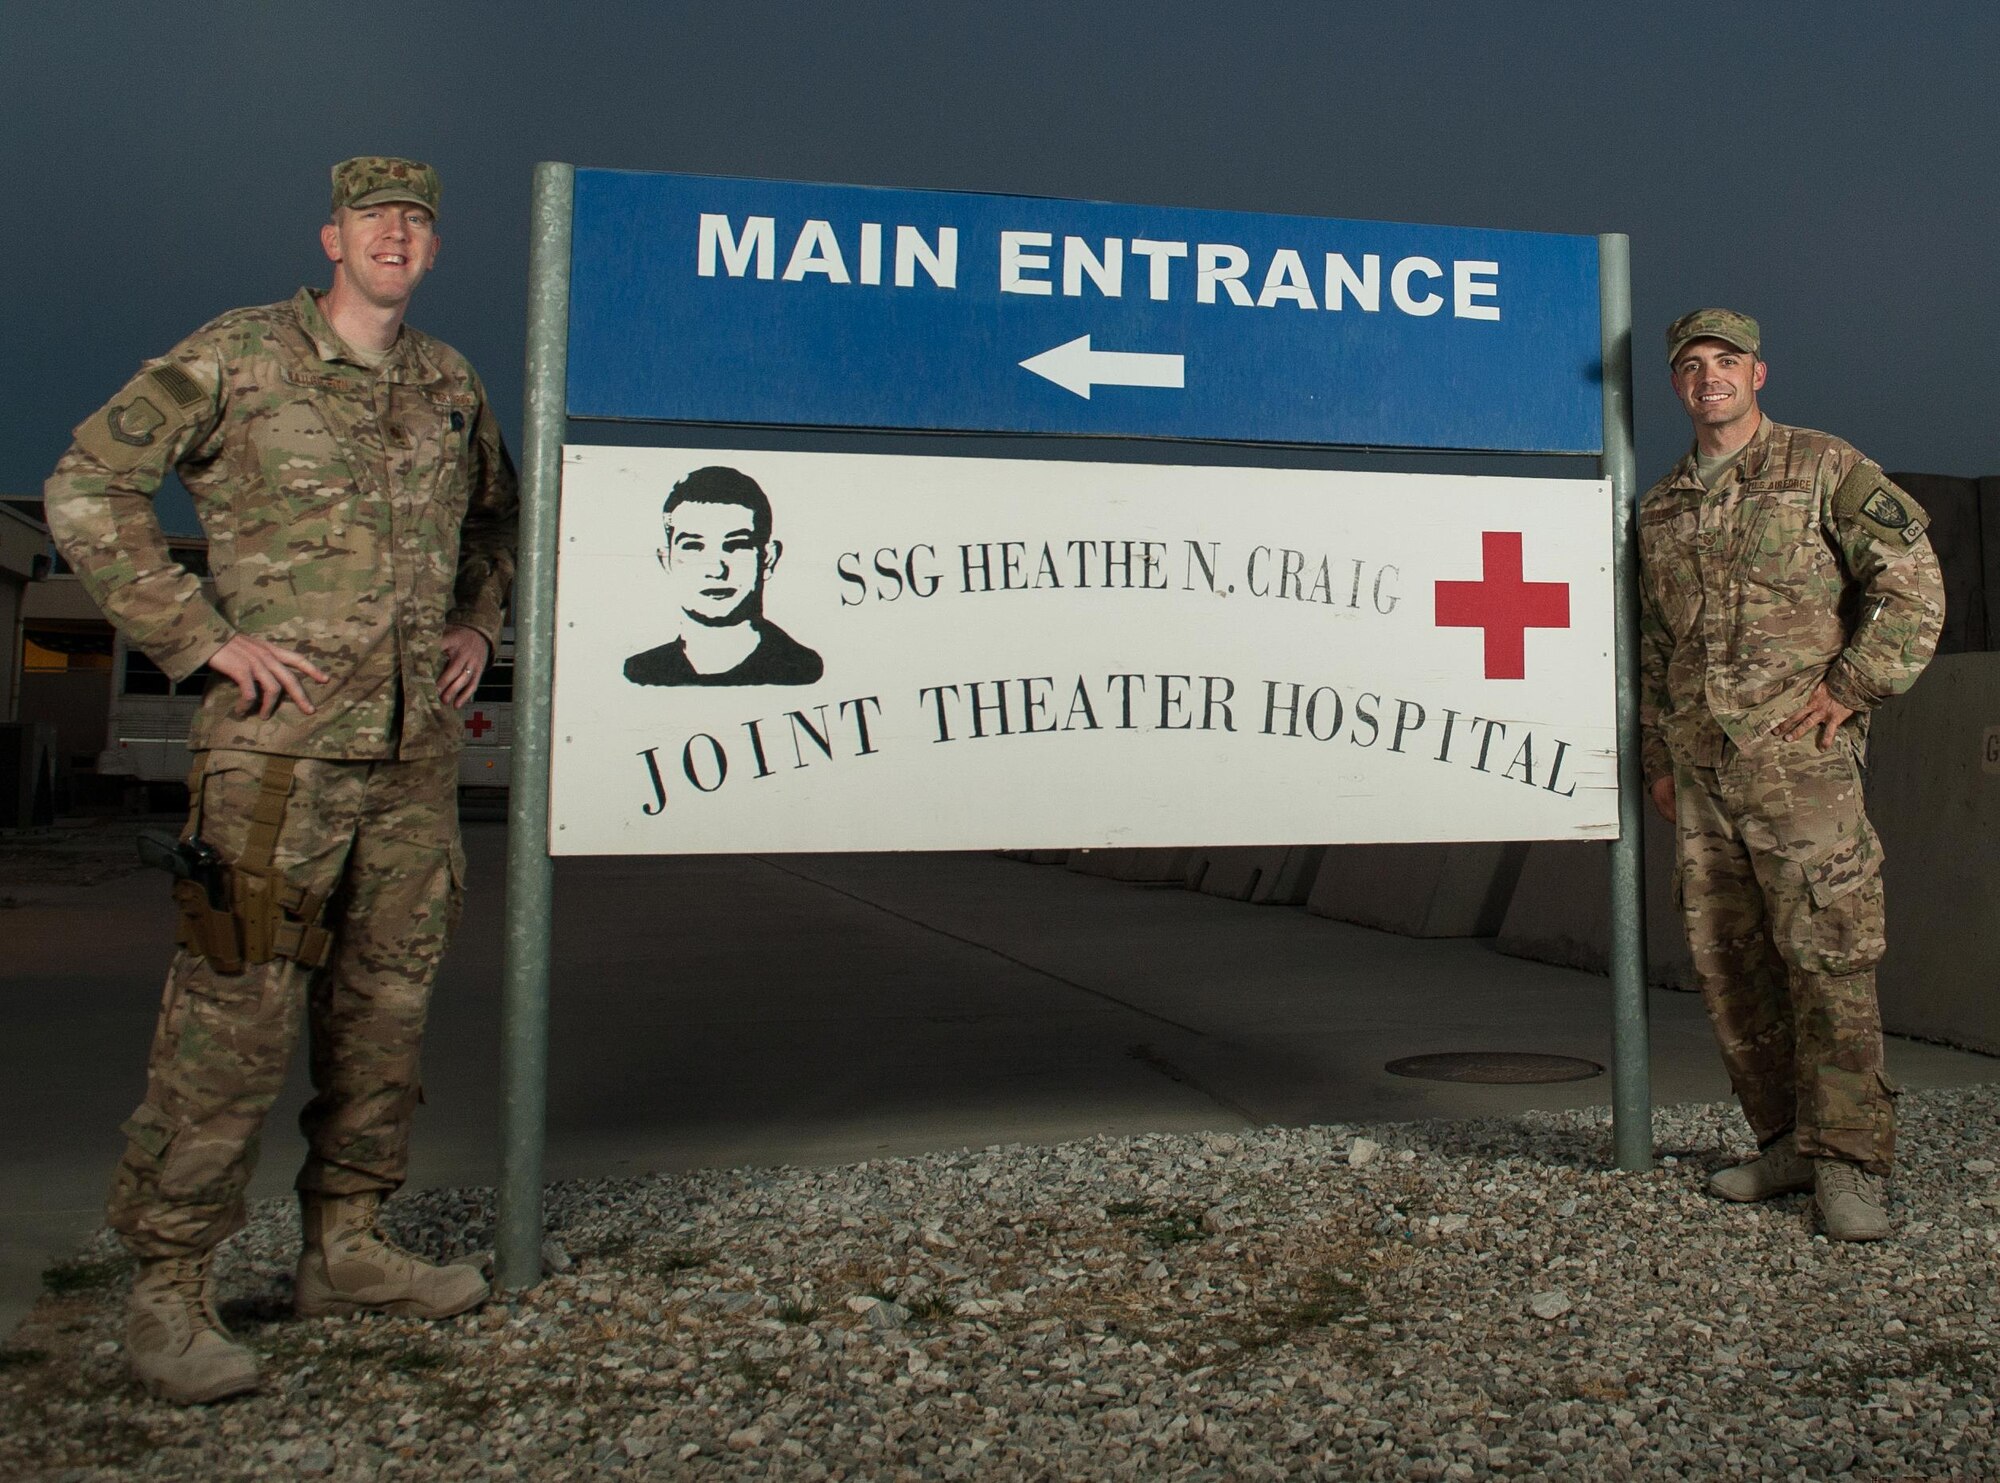 U.S. Air Force Tech. Sgt. Scott Hatch, right, and Maj. Thomas Naughton, both assigned to the 455th Expeditionary Medical Group, pose for a photo near the Craig Joint Theater Hospital at Bagram Airfield, Afghanistan, Sept. 24, 2015. (U.S. Air Force photo by Tech. Sgt. Joseph Swafford/Released)